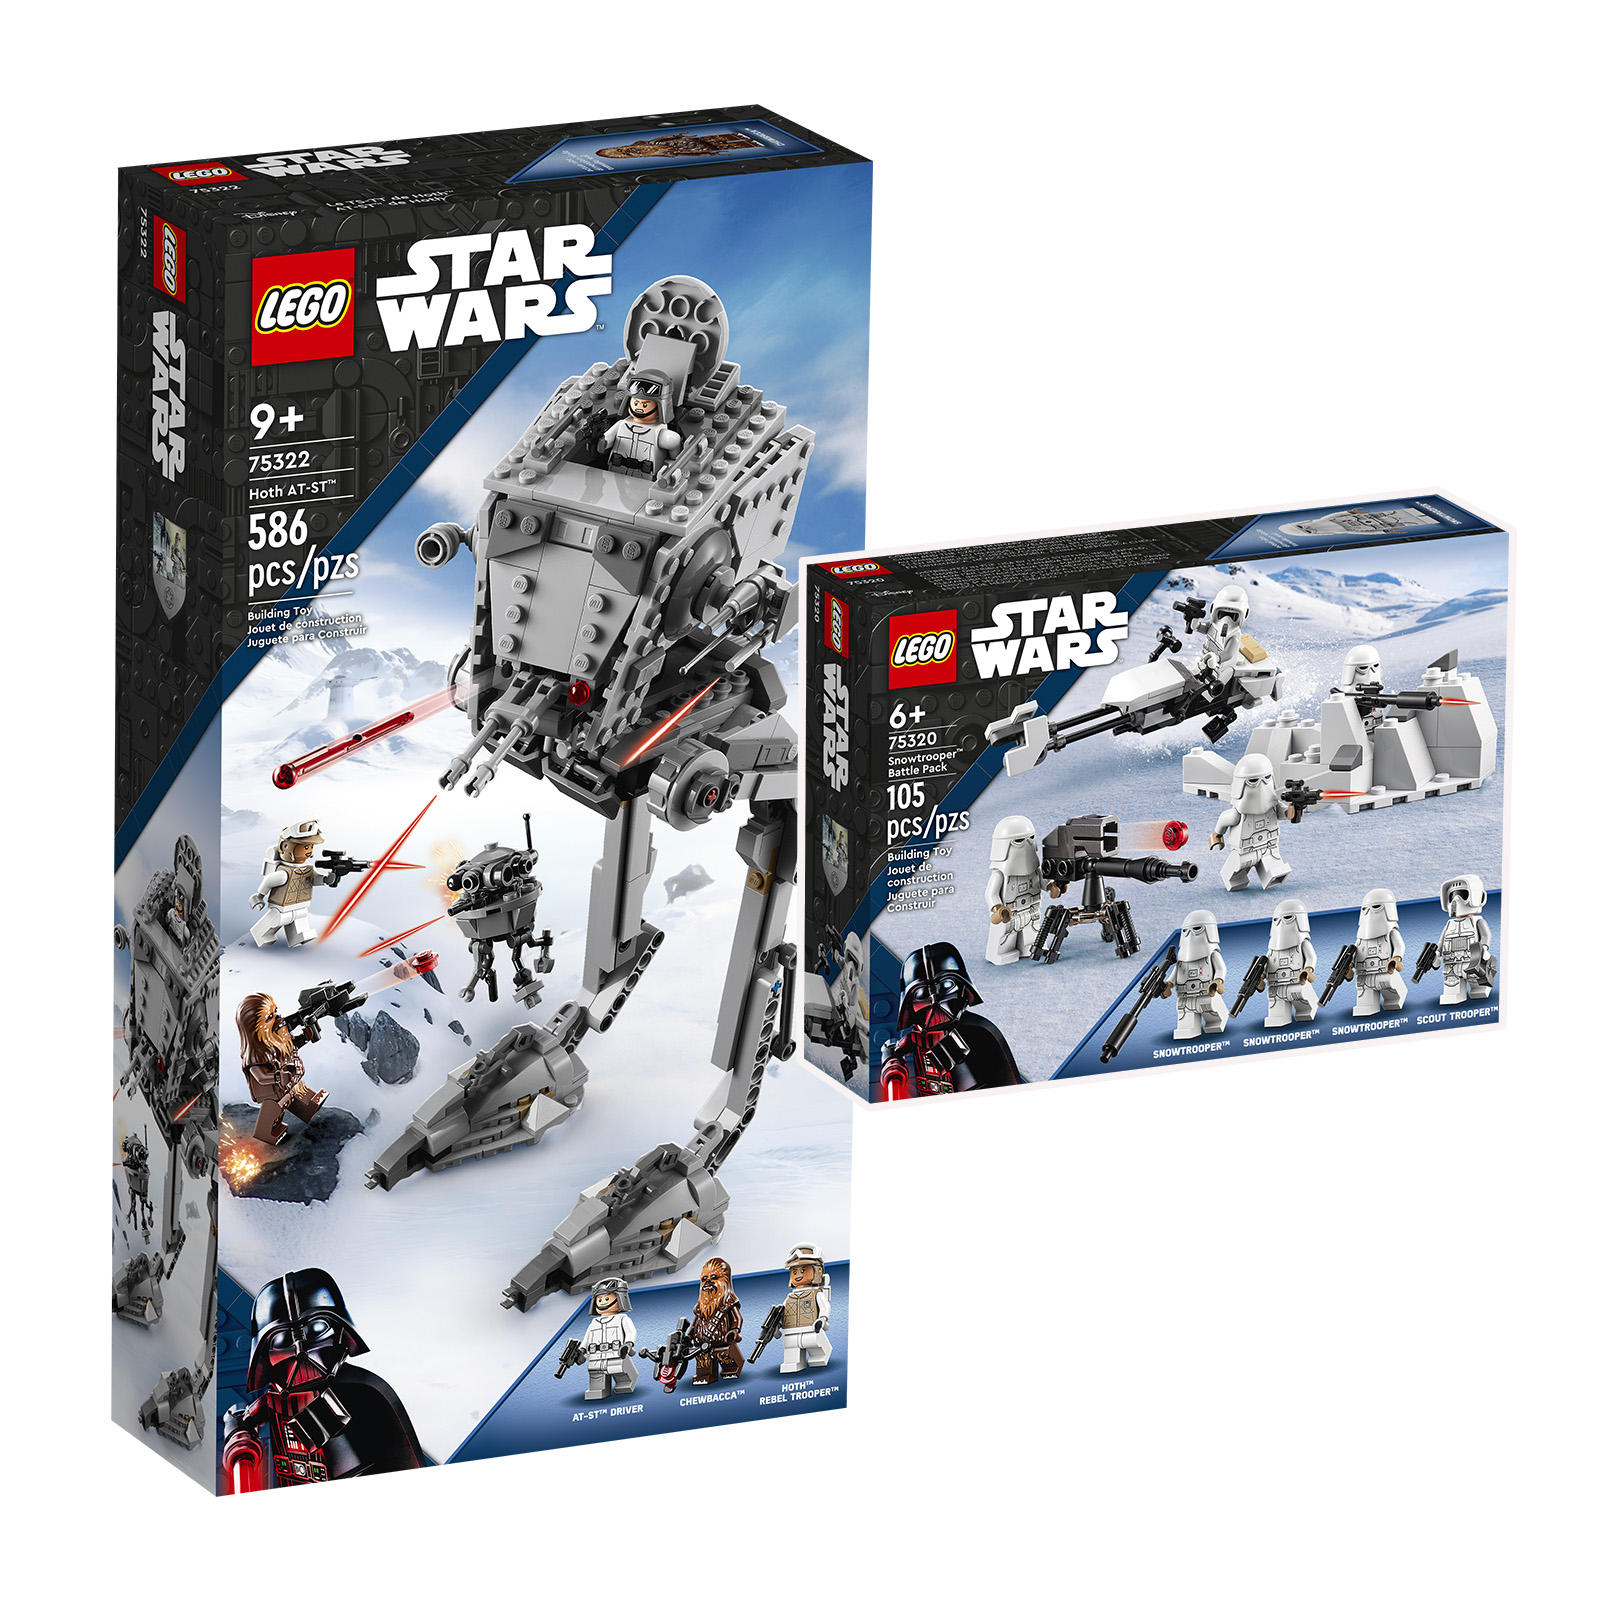 ▻ On the LEGO Shop: the LEGO Star Wars 75320 Snowtrooper Battle Pack and  75322 Hoth AT-ST sets are online - HOTH BRICKS